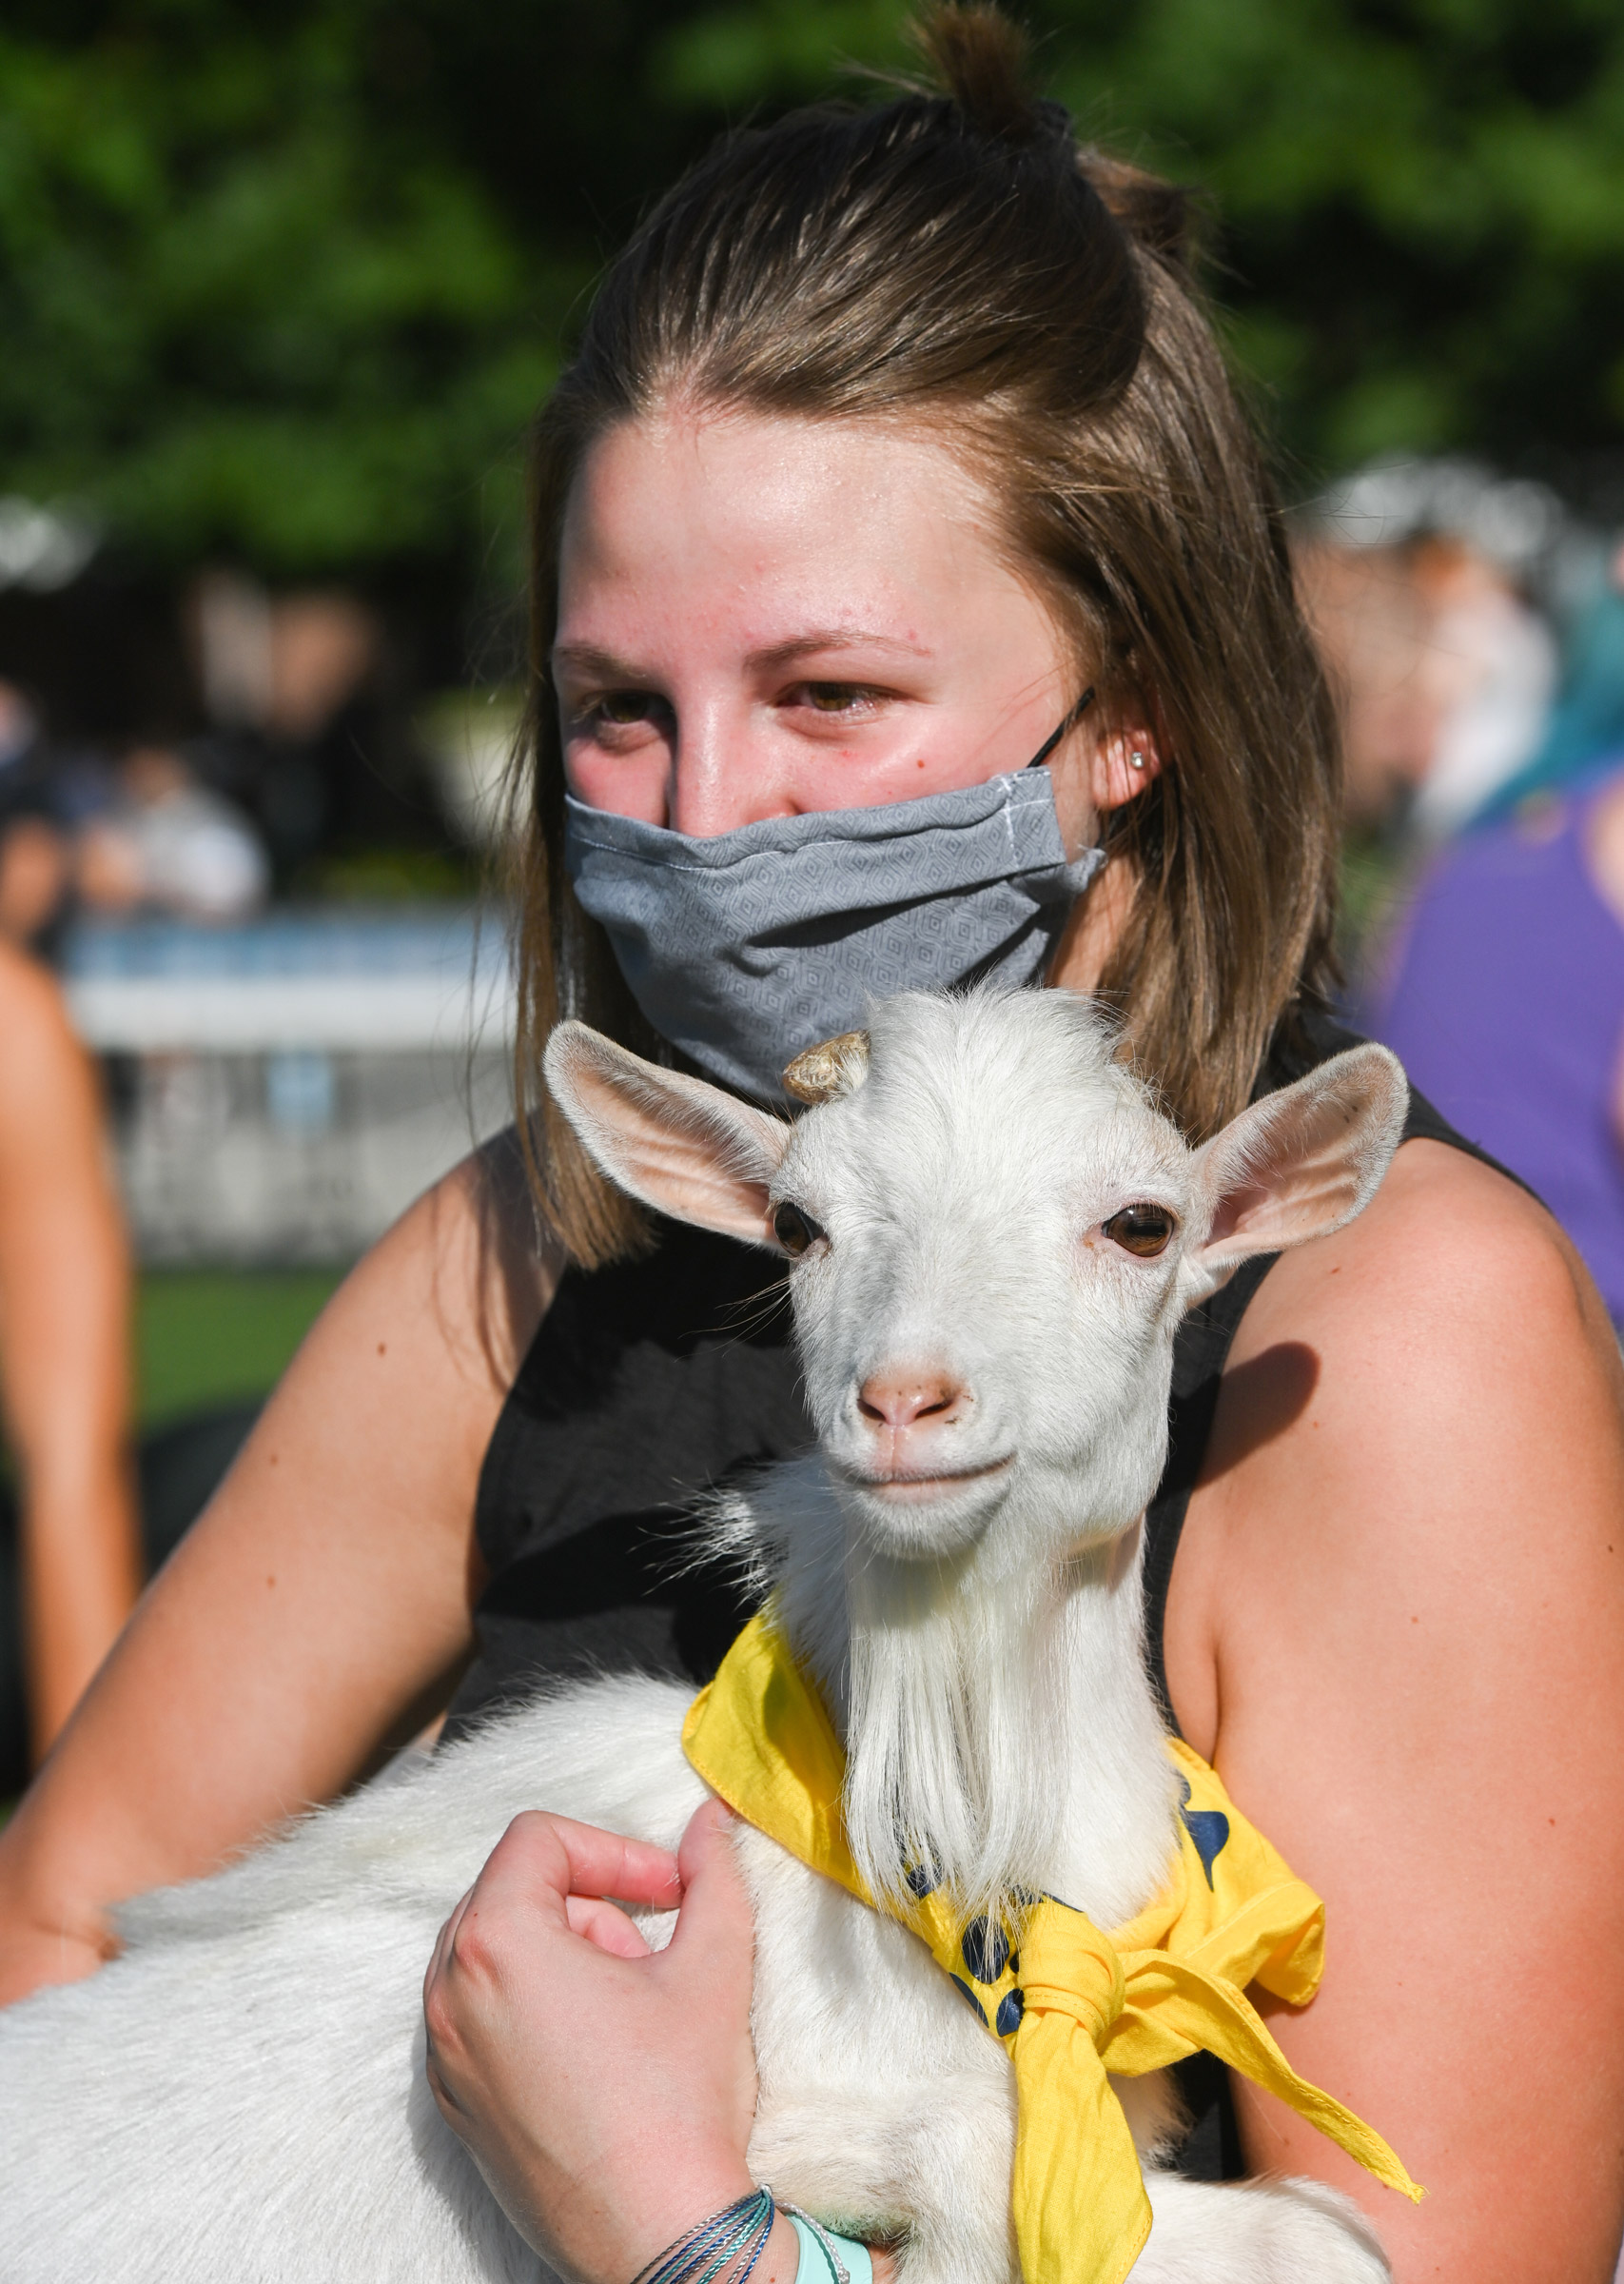 A woman cradles a young goat in her arms during a yoga class